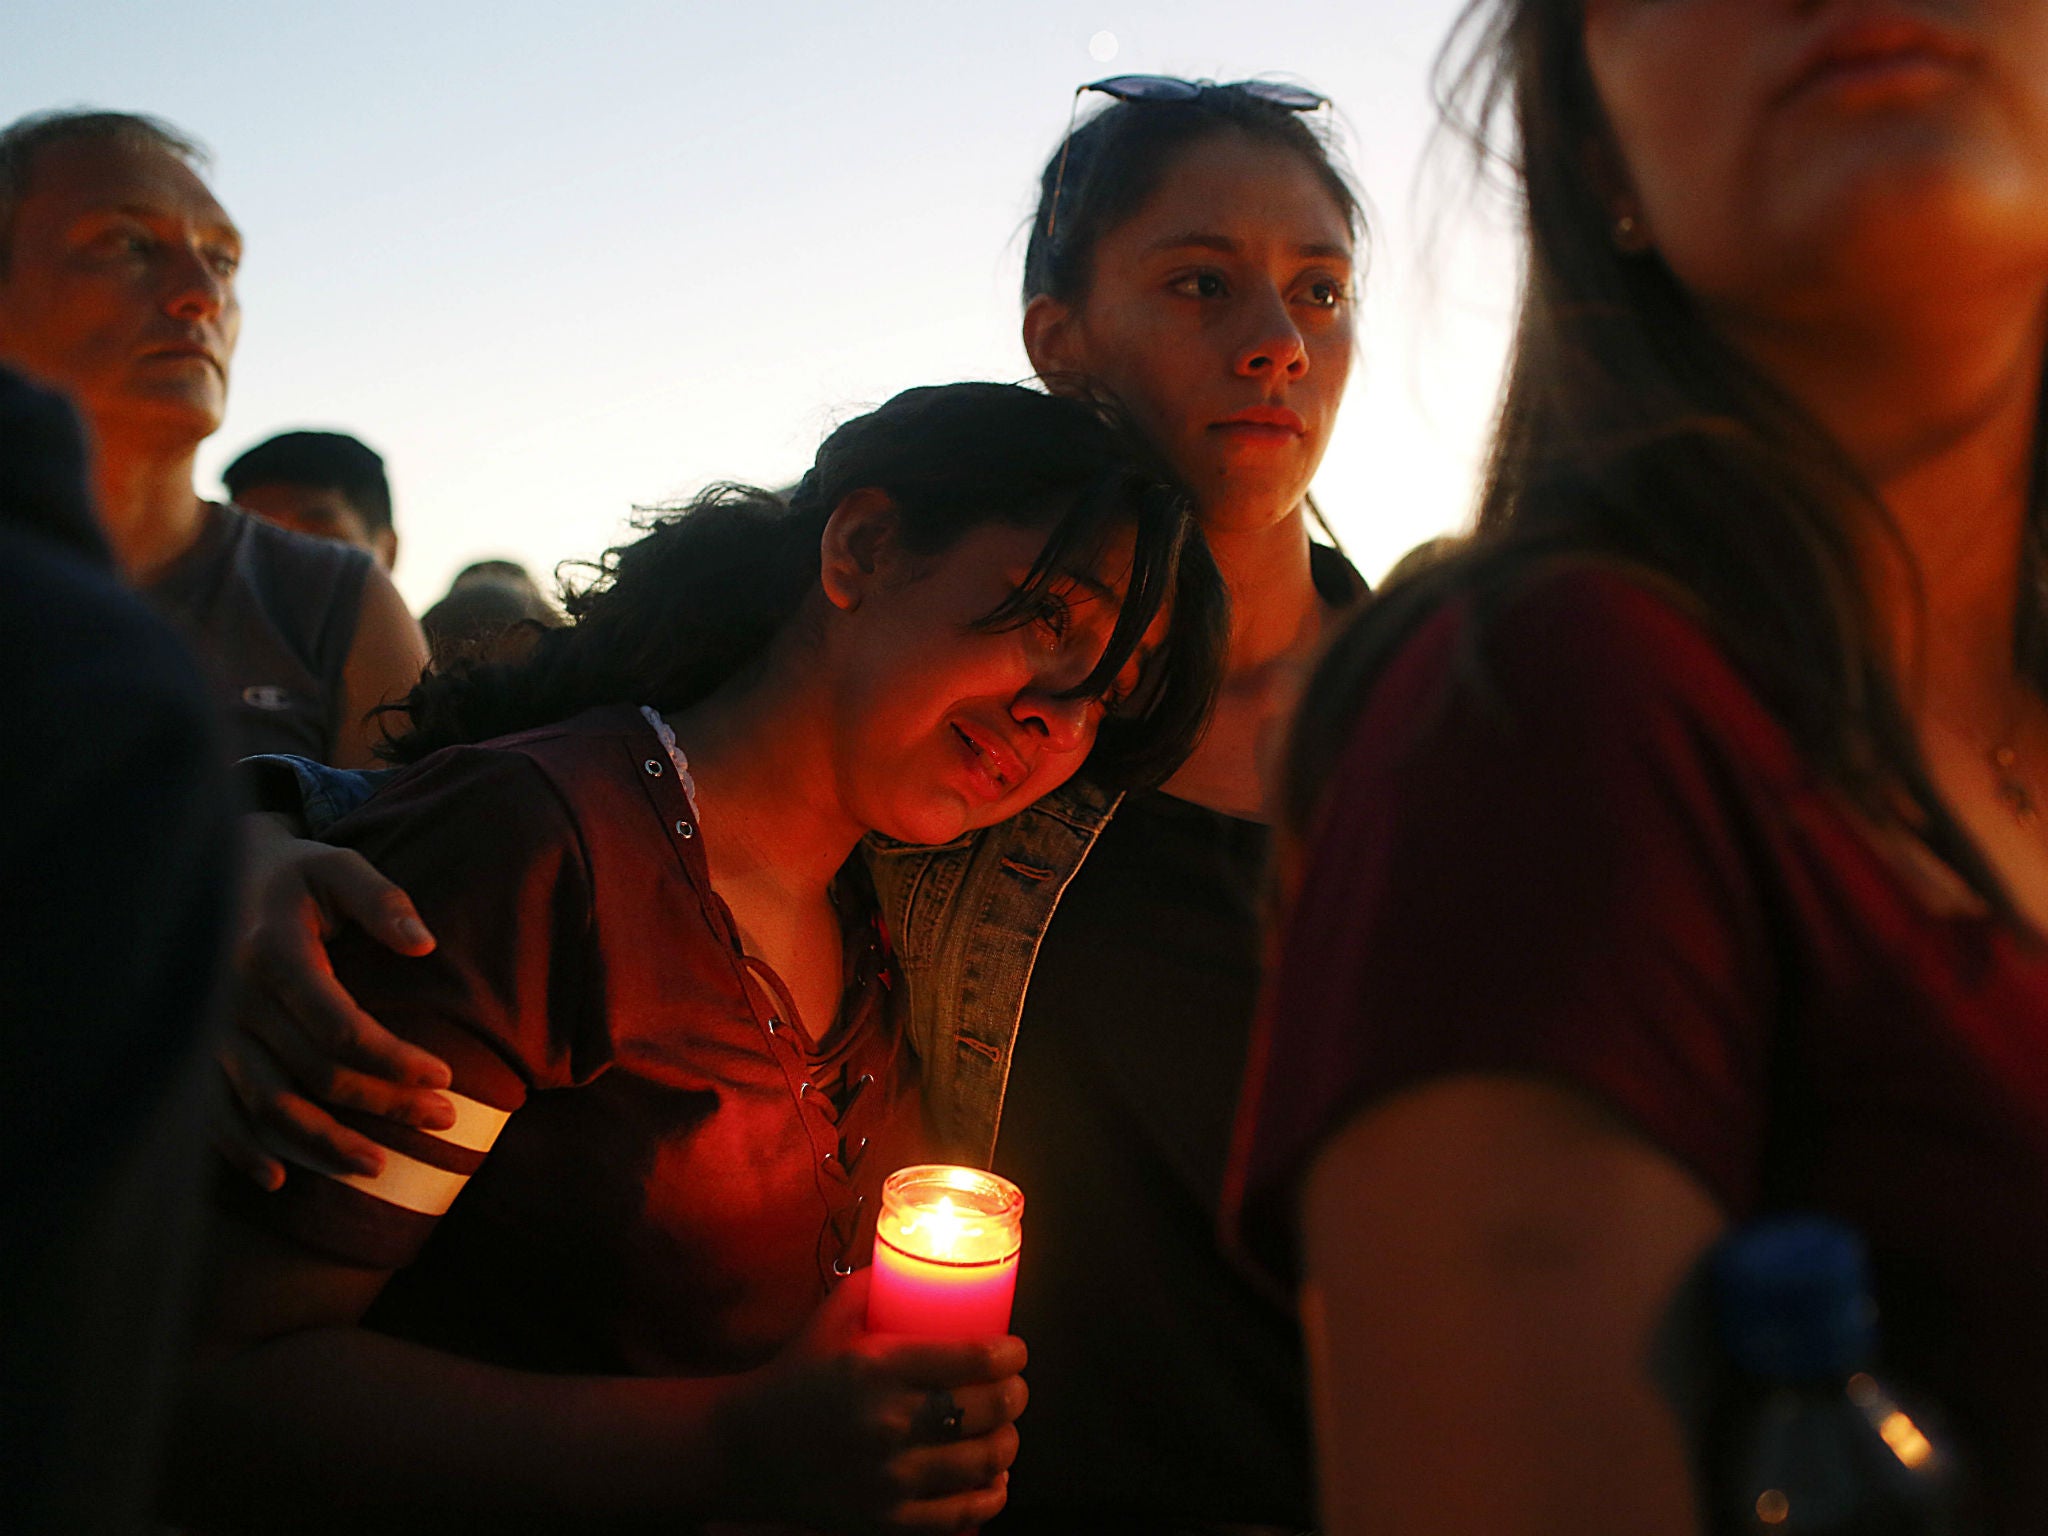 Seventeen students were killed in the February 14, 2018 Parkland school shooting